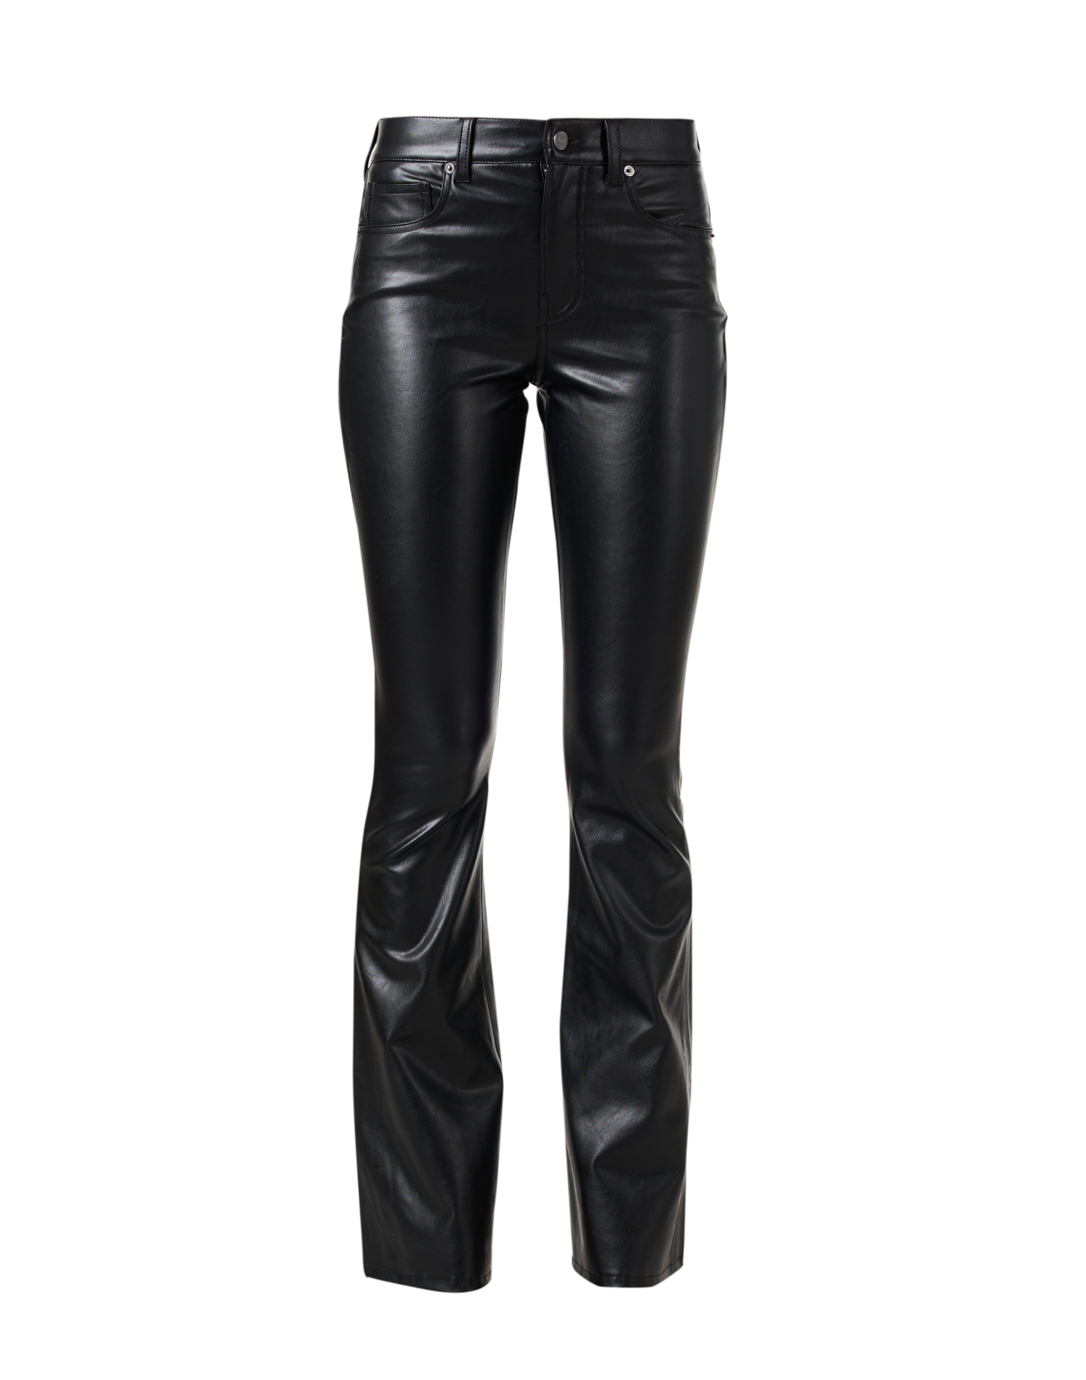 Beverly faux leather pants in black - Veronica Beard